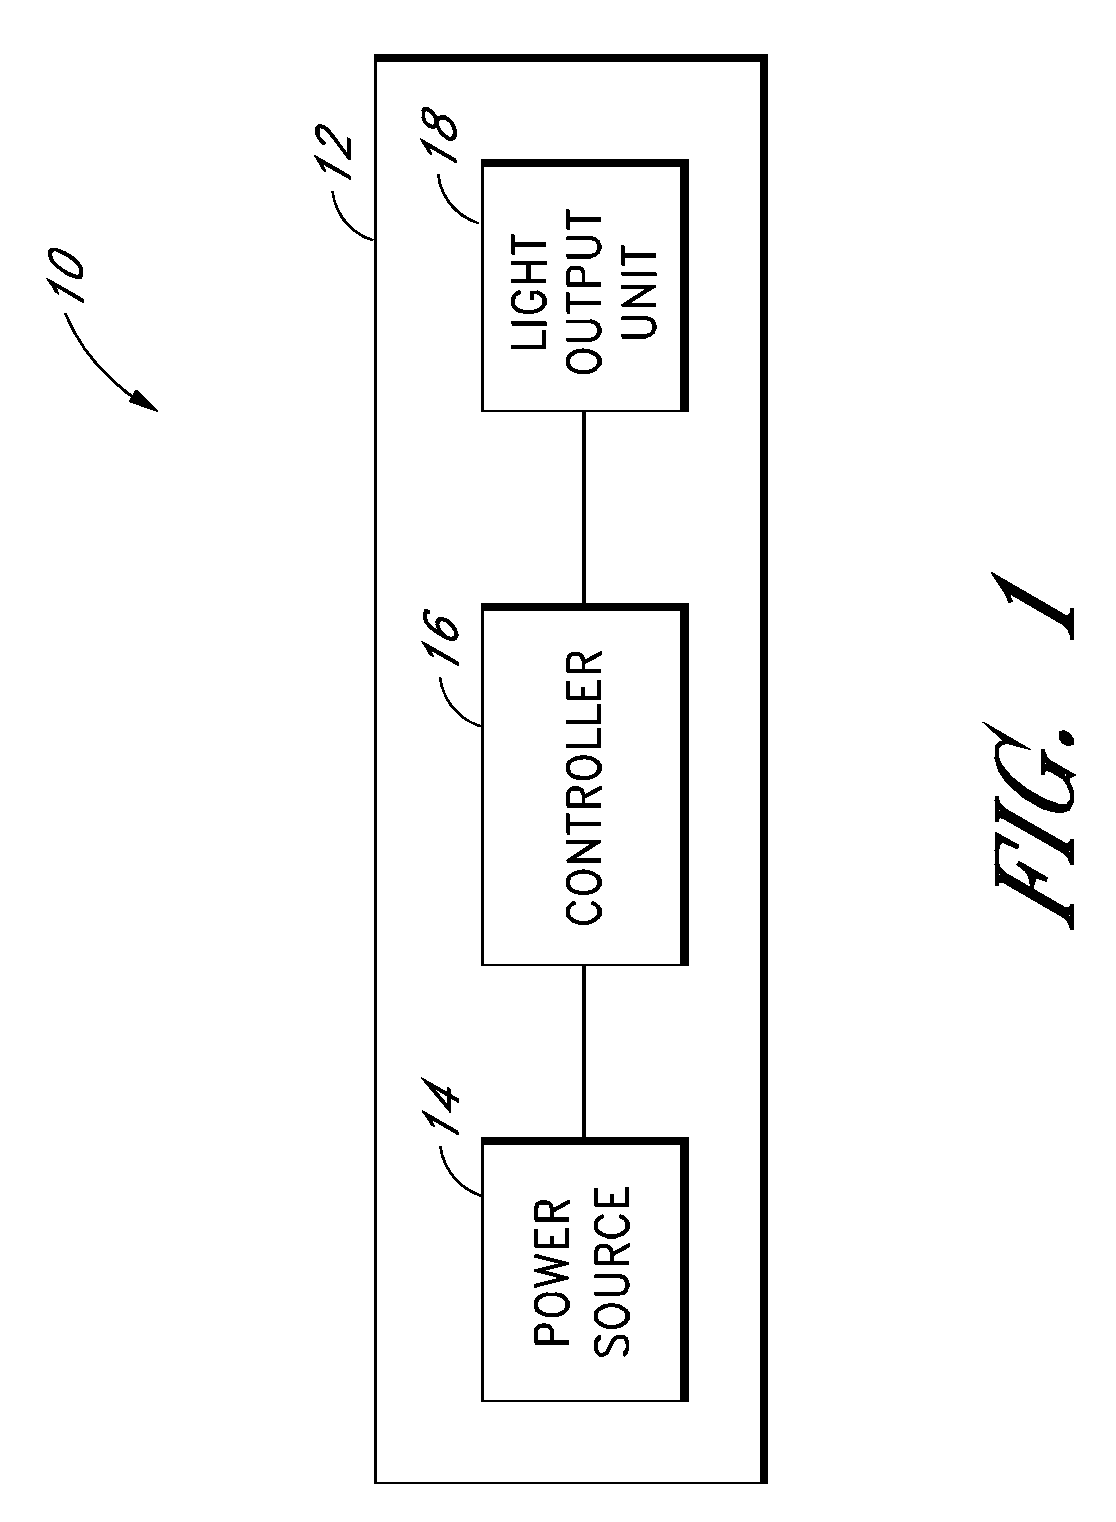 Systems and methods for ornamental variable intensity lighting displays